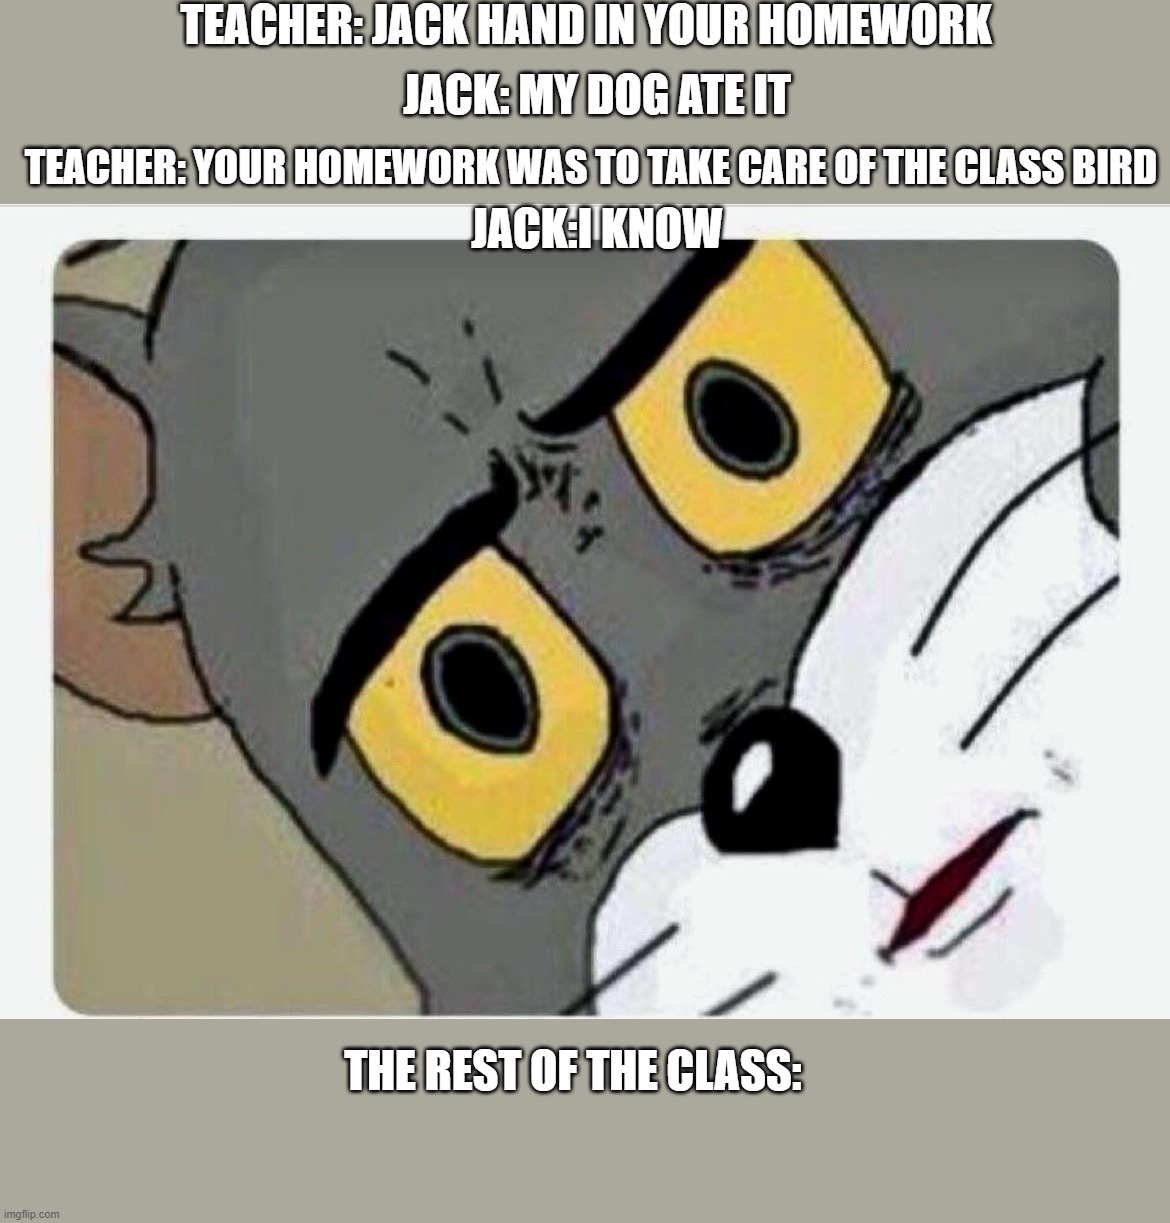 Disturbed Tom | TEACHER: JACK HAND IN YOUR HOMEWORK; JACK: MY DOG ATE IT; TEACHER: YOUR HOMEWORK WAS TO TAKE CARE OF THE CLASS BIRD; JACK:I KNOW; THE REST OF THE CLASS: | image tagged in disturbed tom | made w/ Imgflip meme maker